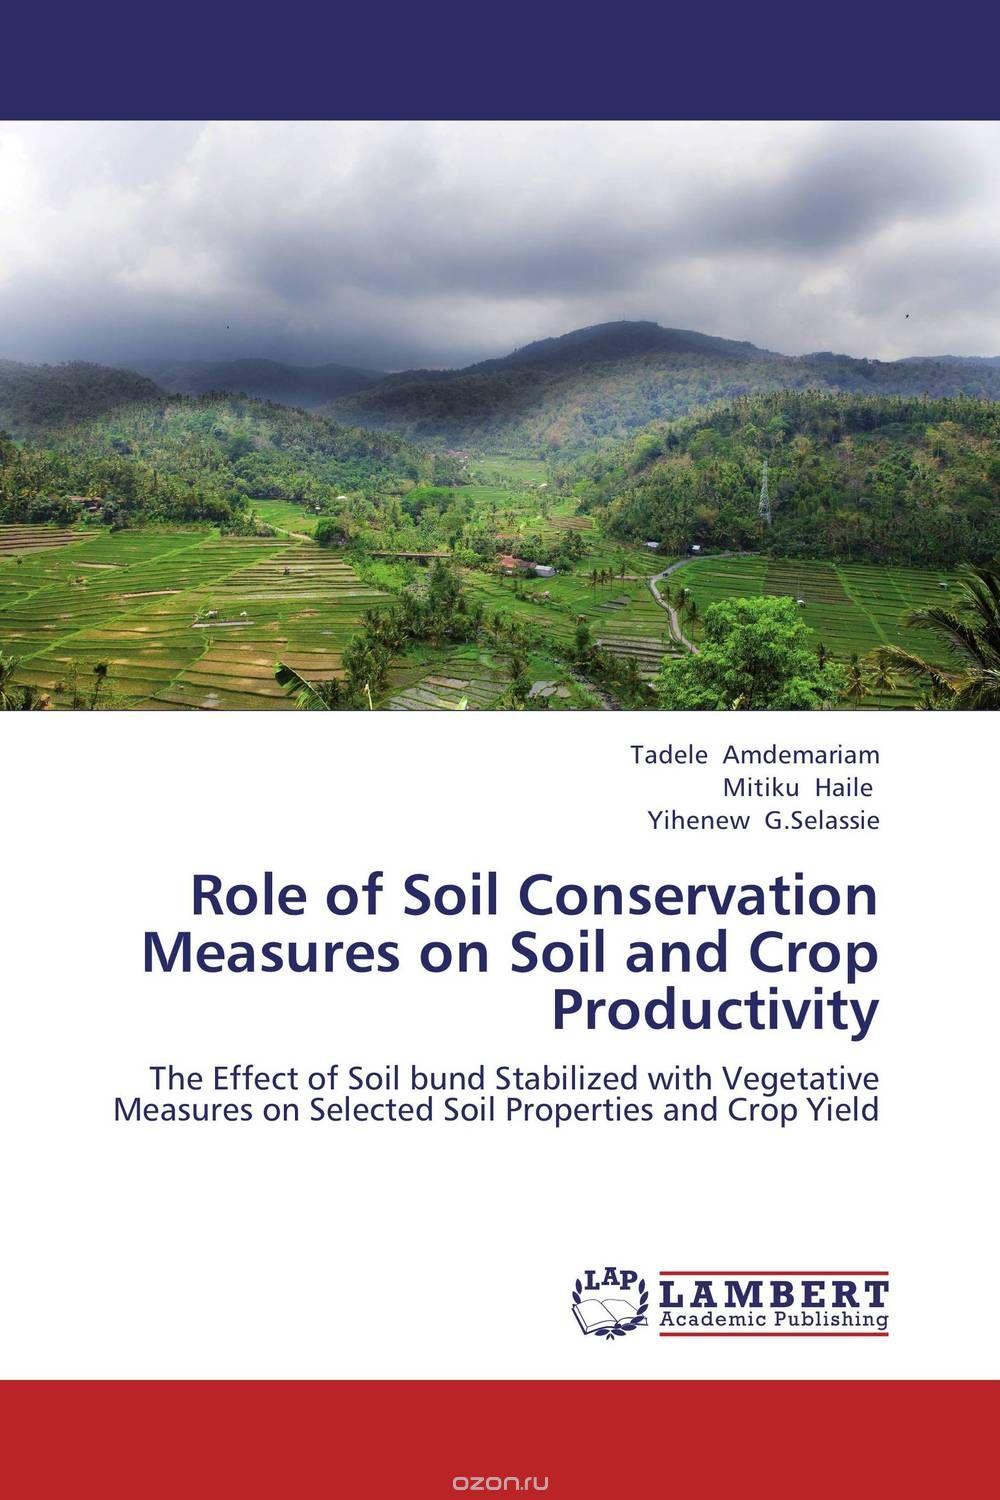 Скачать книгу "Role of Soil Conservation Measures on Soil and Crop Productivity"